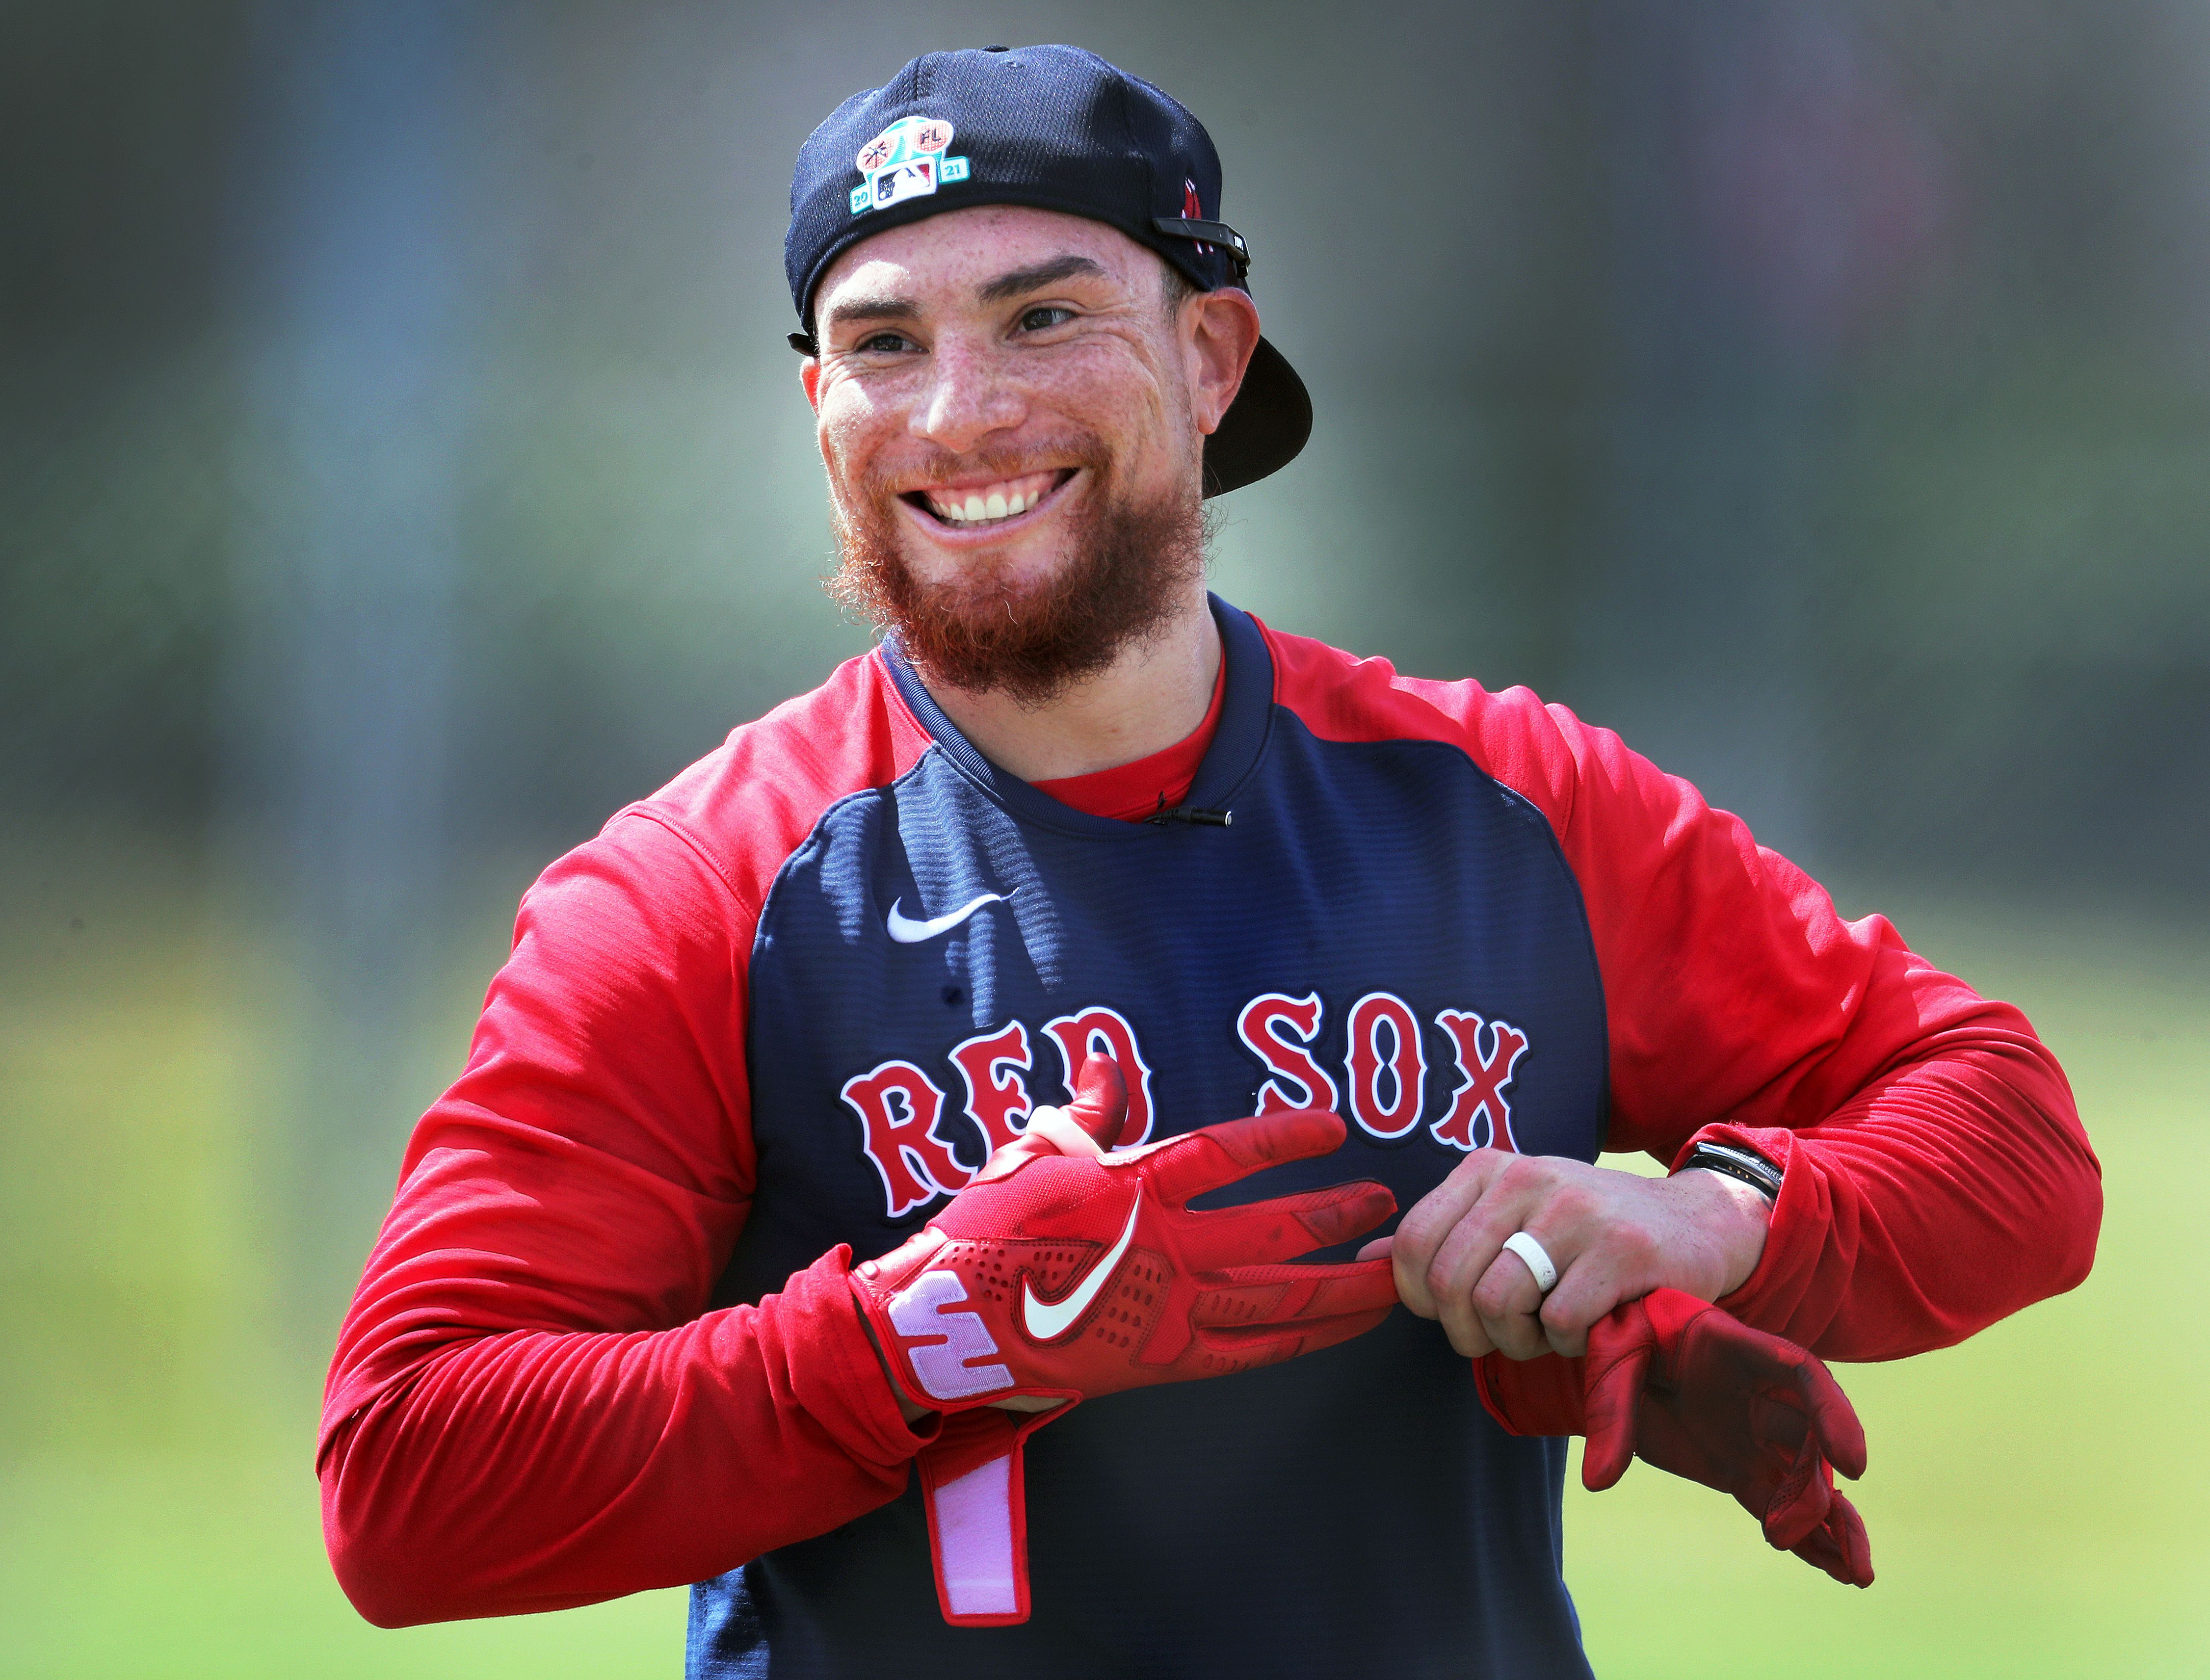 Red Sox catcher Vazquez wants to win a Gold Glove